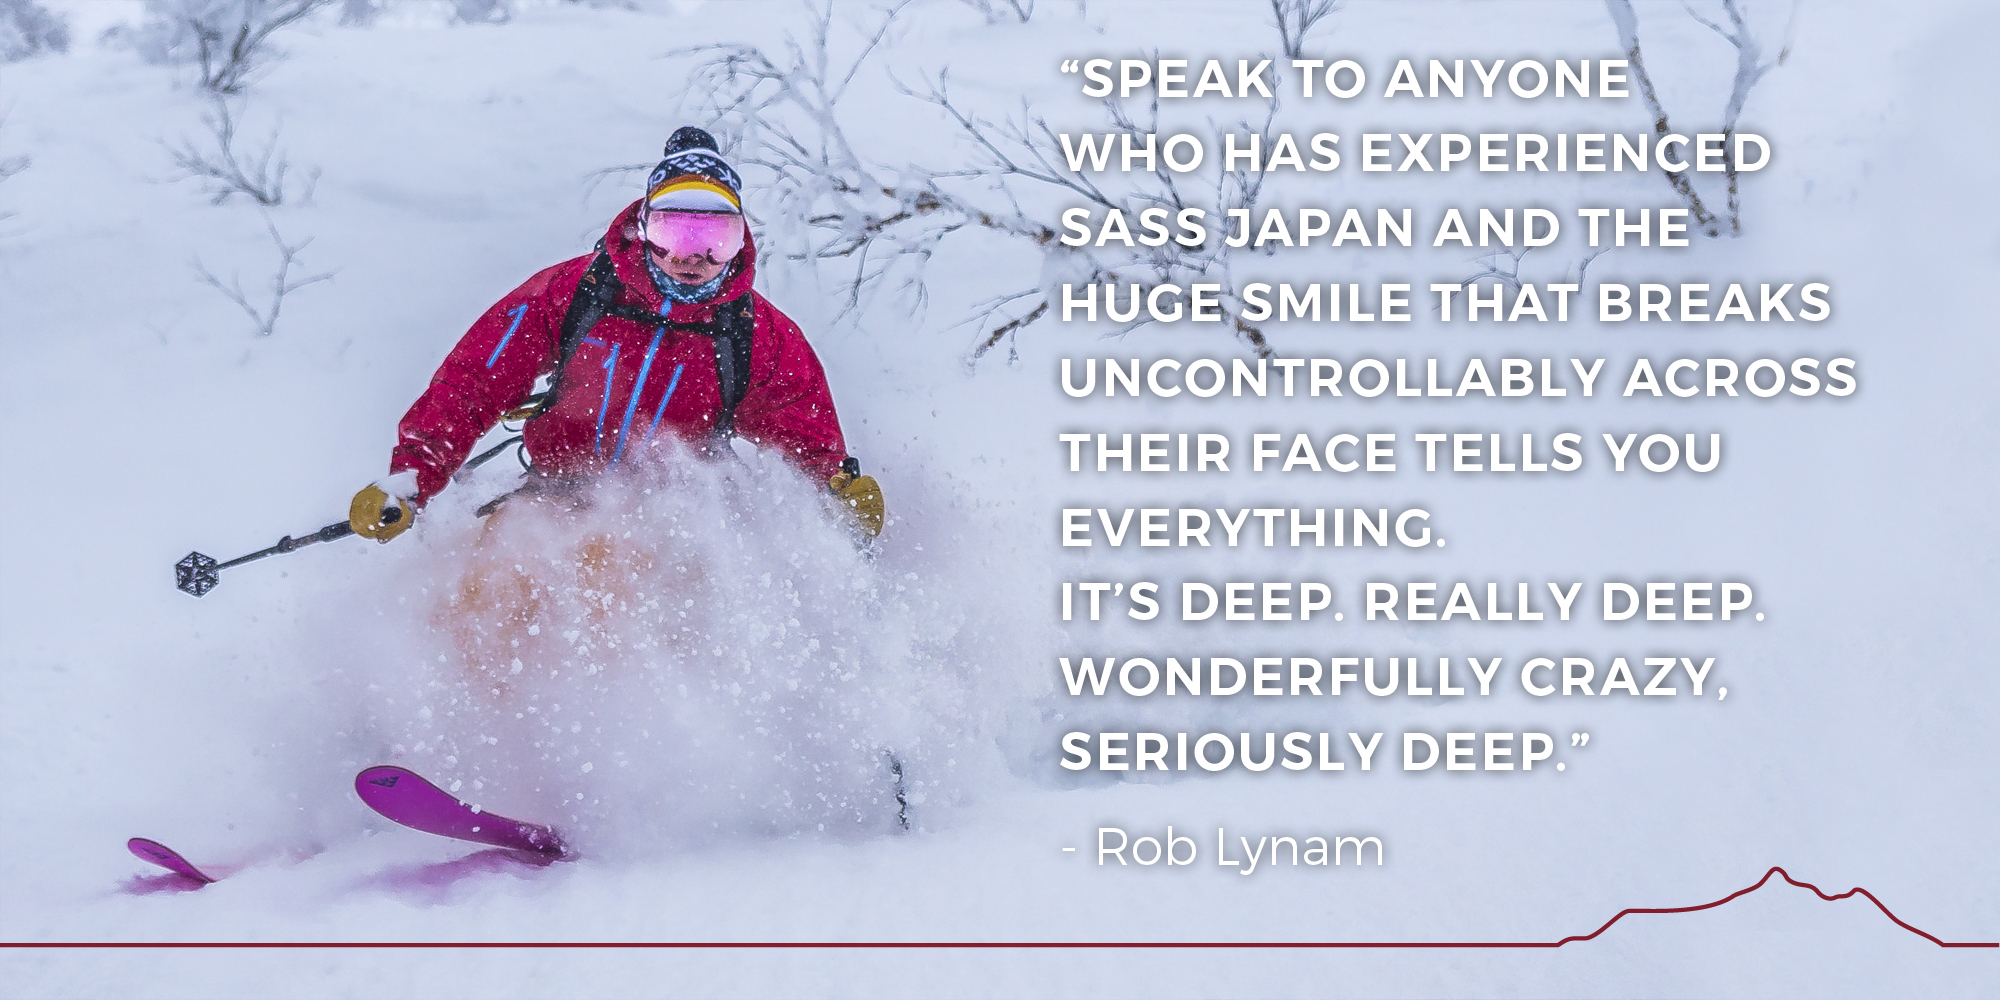 Speak to anyone who has experienced SASS Japan and the huge smile that breaks uncontrollably across their face tells you everything. It’s deep. Really deep. Wonderfully crazy, seriously deep. - Rob Lynam